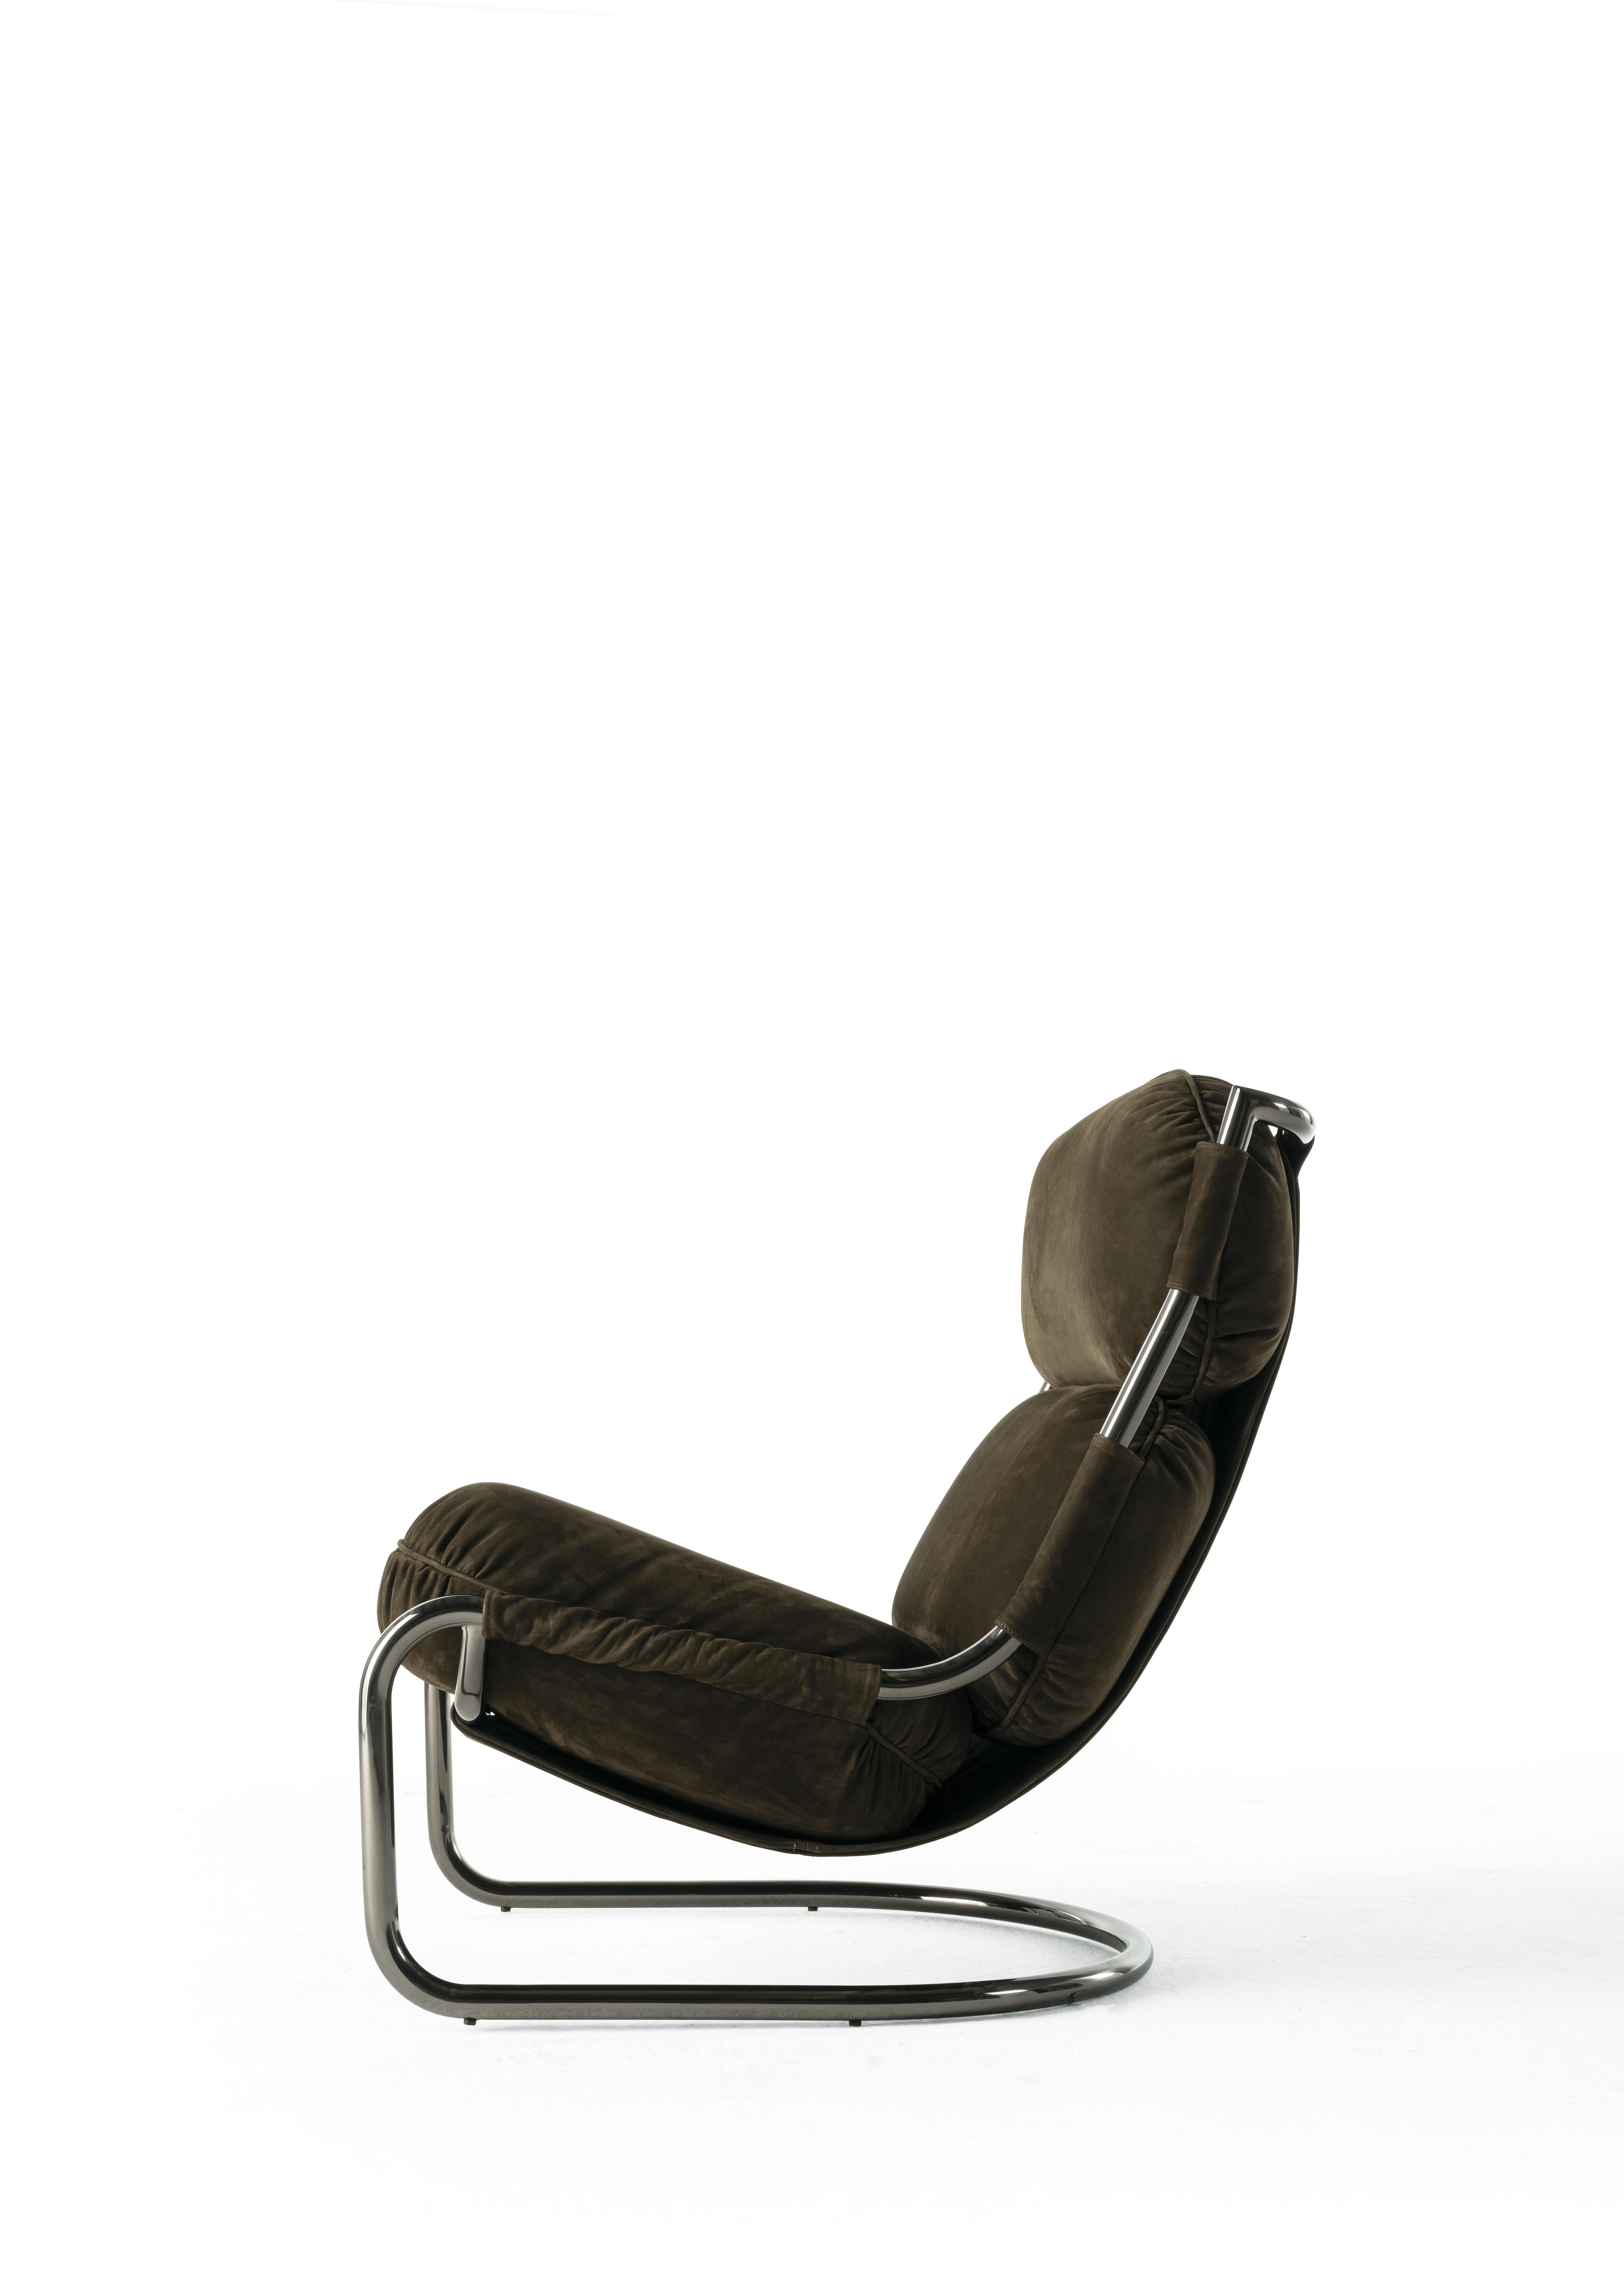 Captivating lines and retrò inspiration for Columbus armchair. Featuring a tall seatback and a generous seat, the armchair combines an inviting aesthetic with the highest level of comfort.
Columbus Armchair with structure in metal with Black Chrome